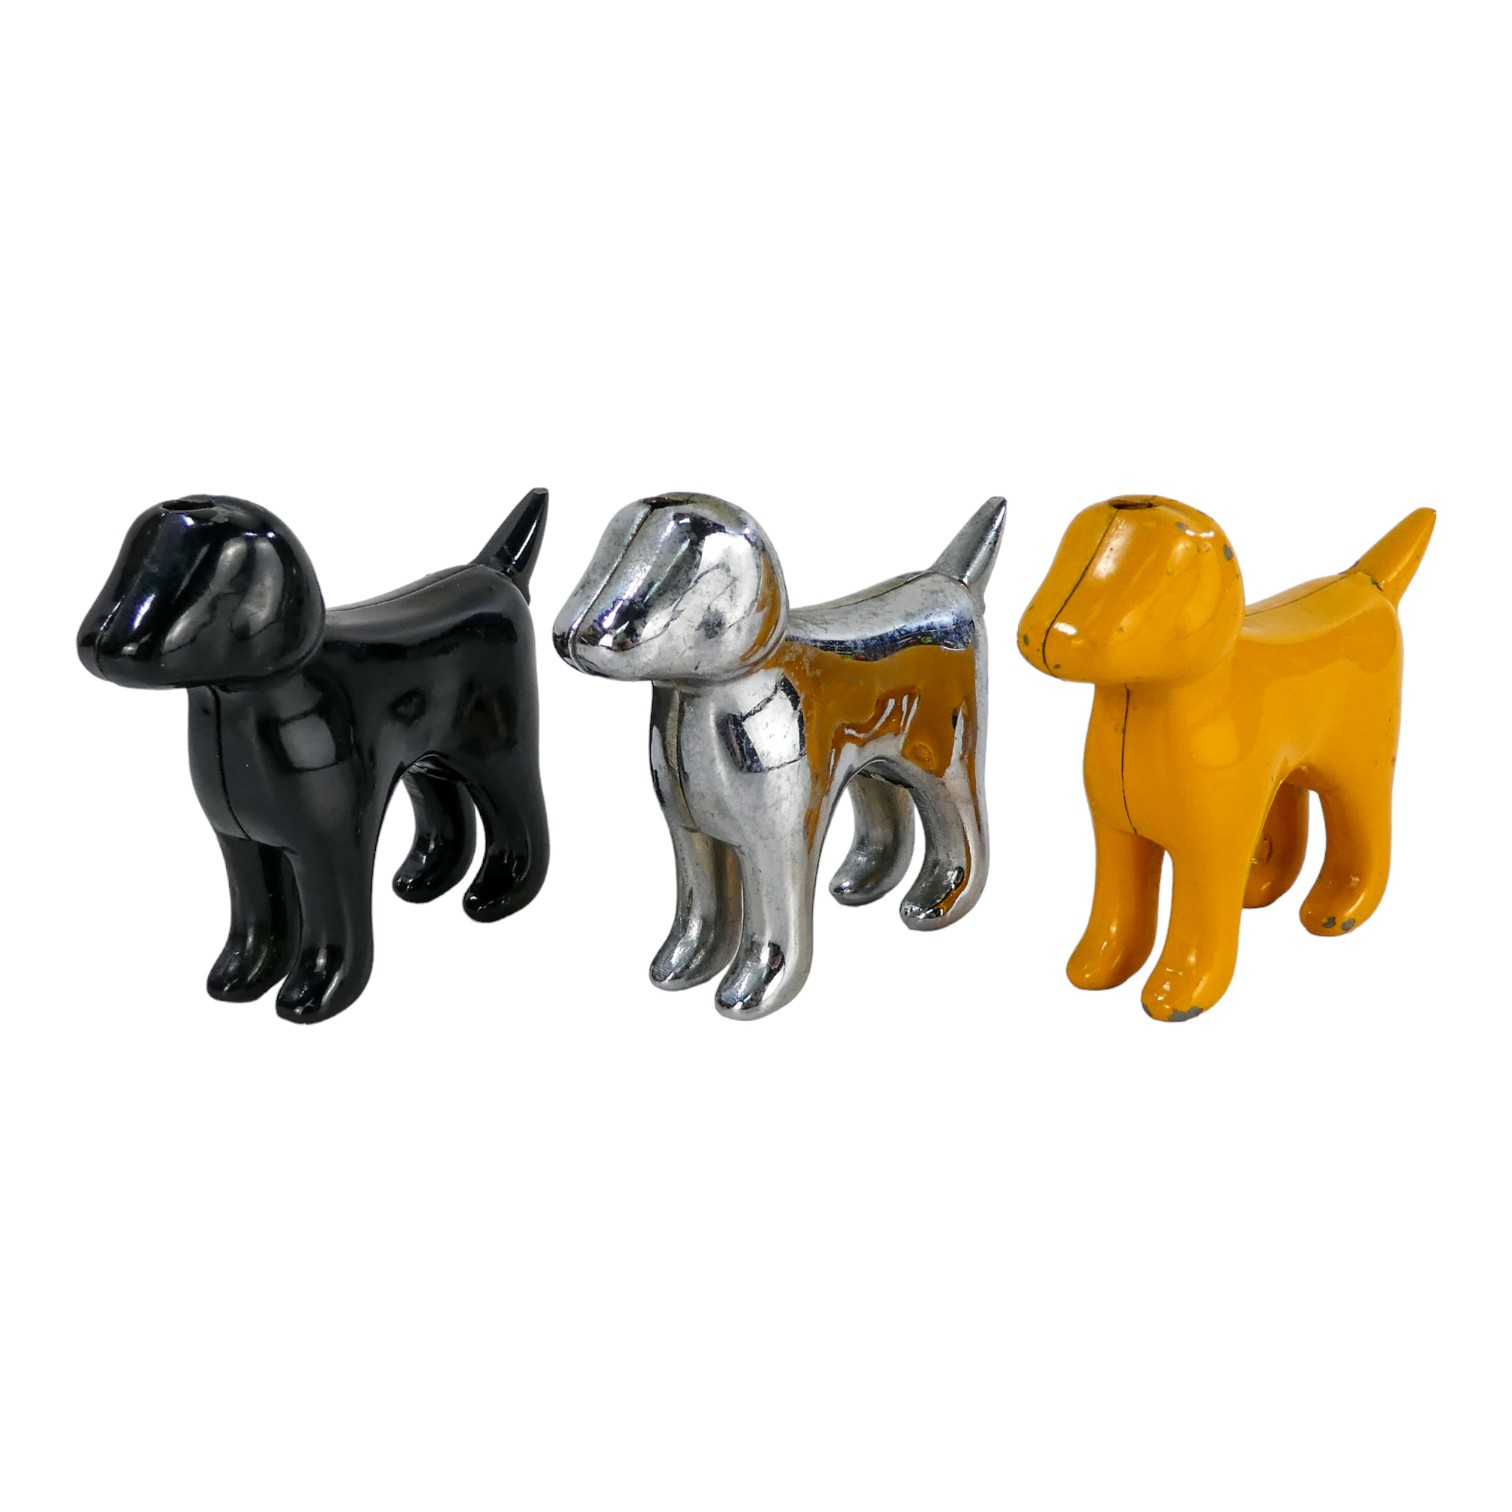 A 20th century table lighter in the form of a dog - chrome, height 6cm, together with two similar,